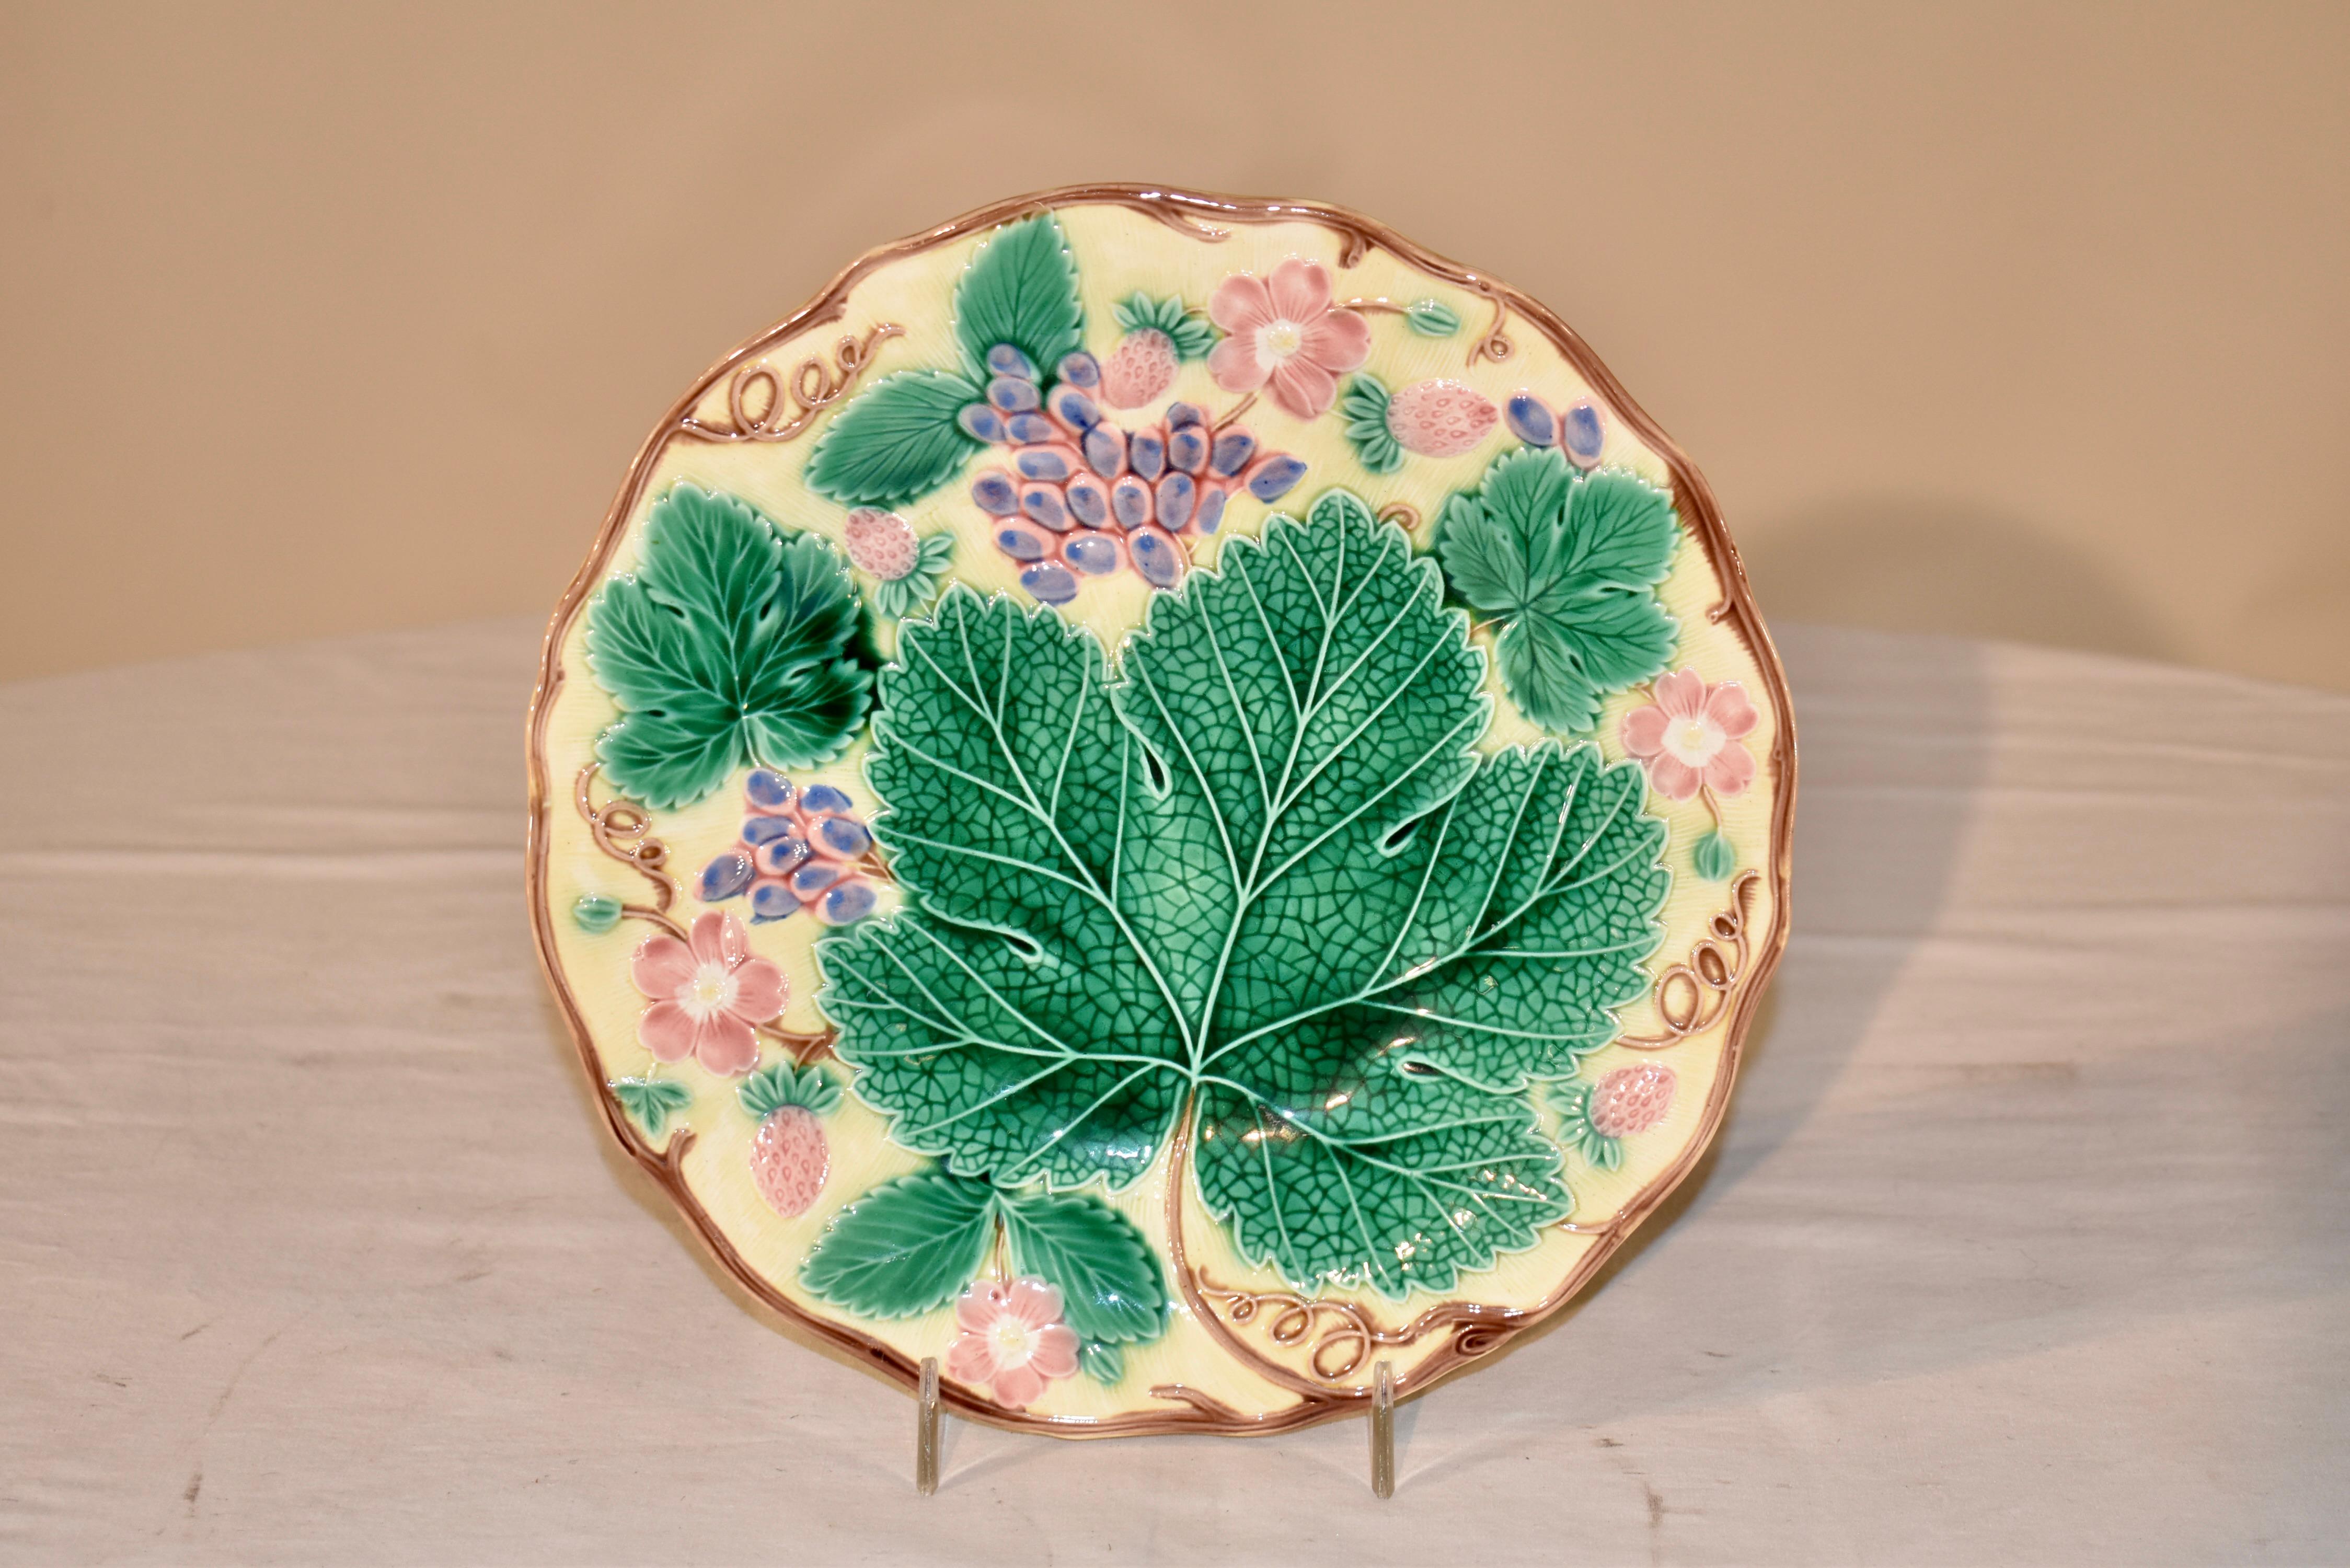 Wedgwood majolica leaf plate in a gorgeous pale yellow color background. The border is molded in a vine design, surrounding a central large grape leaf and decorated with grapes, florals and strawberries. This is a lovely pattern I have had in solid